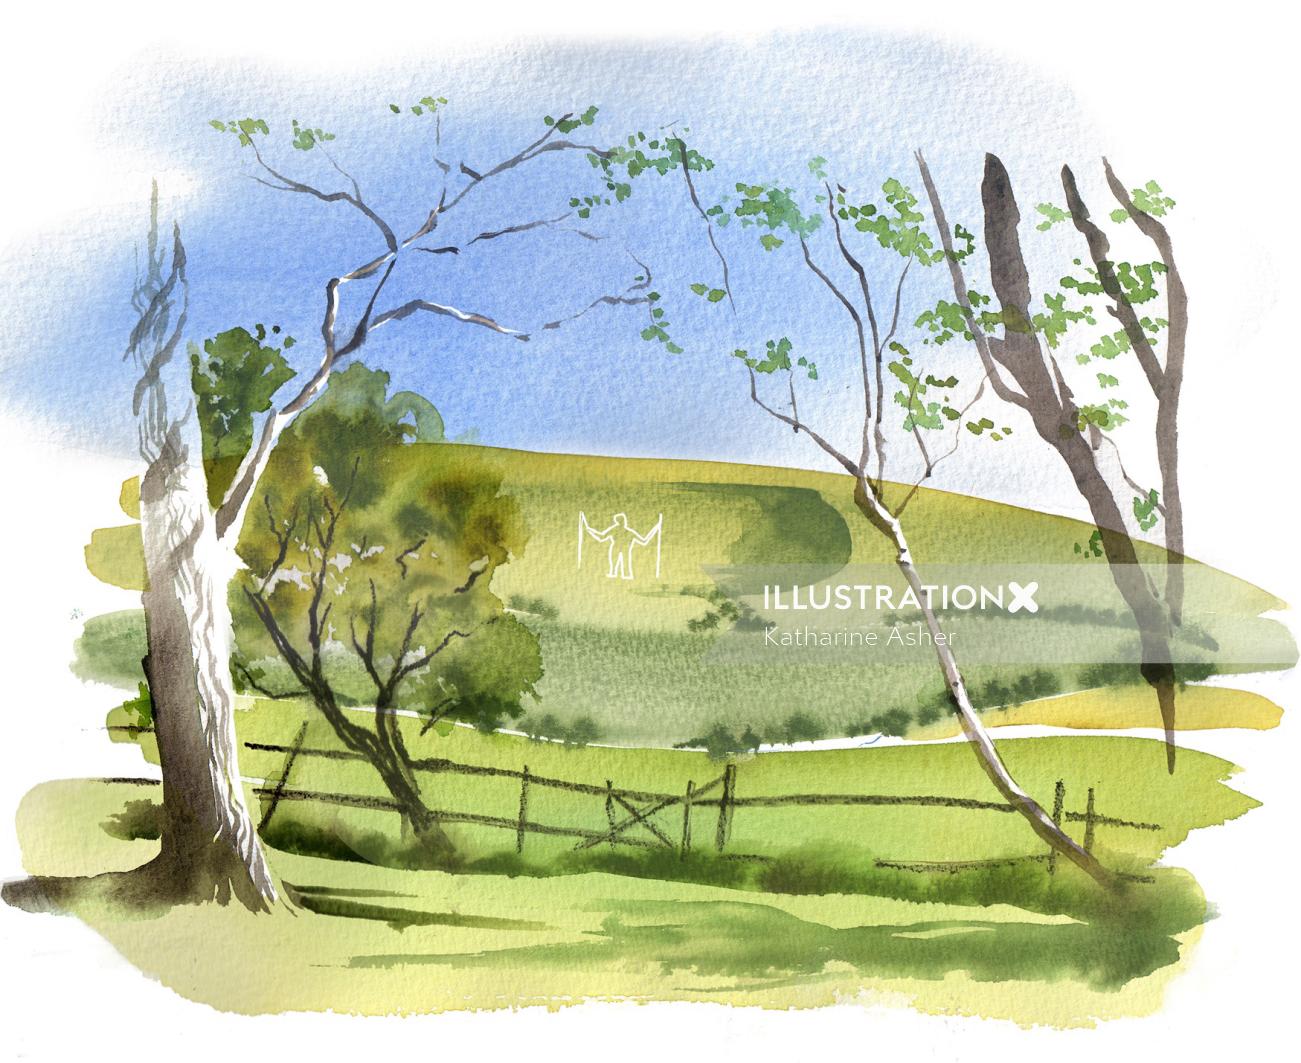 The south downs illustration by Katharine Asher